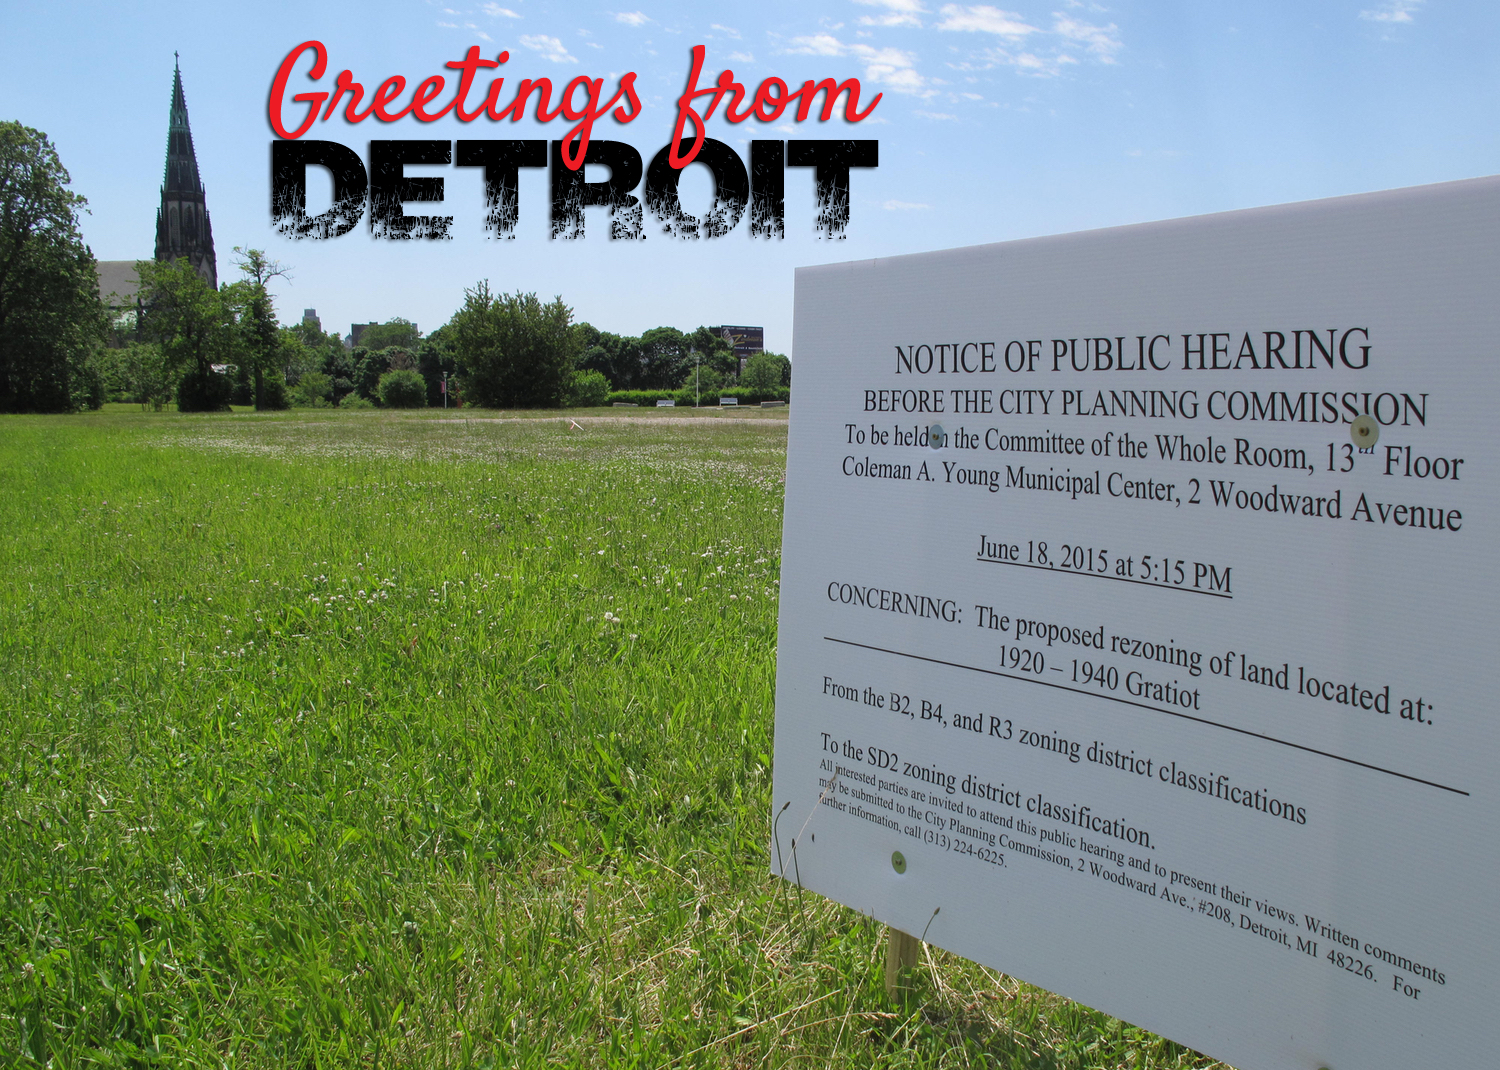 If they build an Olympic-style velodrome, will they come? A sign advises residents about a zoning hearing next week on the site of an indoor velodrome and BMX track on Gratiot in Detroit. (Bridge photo by Bill McGraw)[